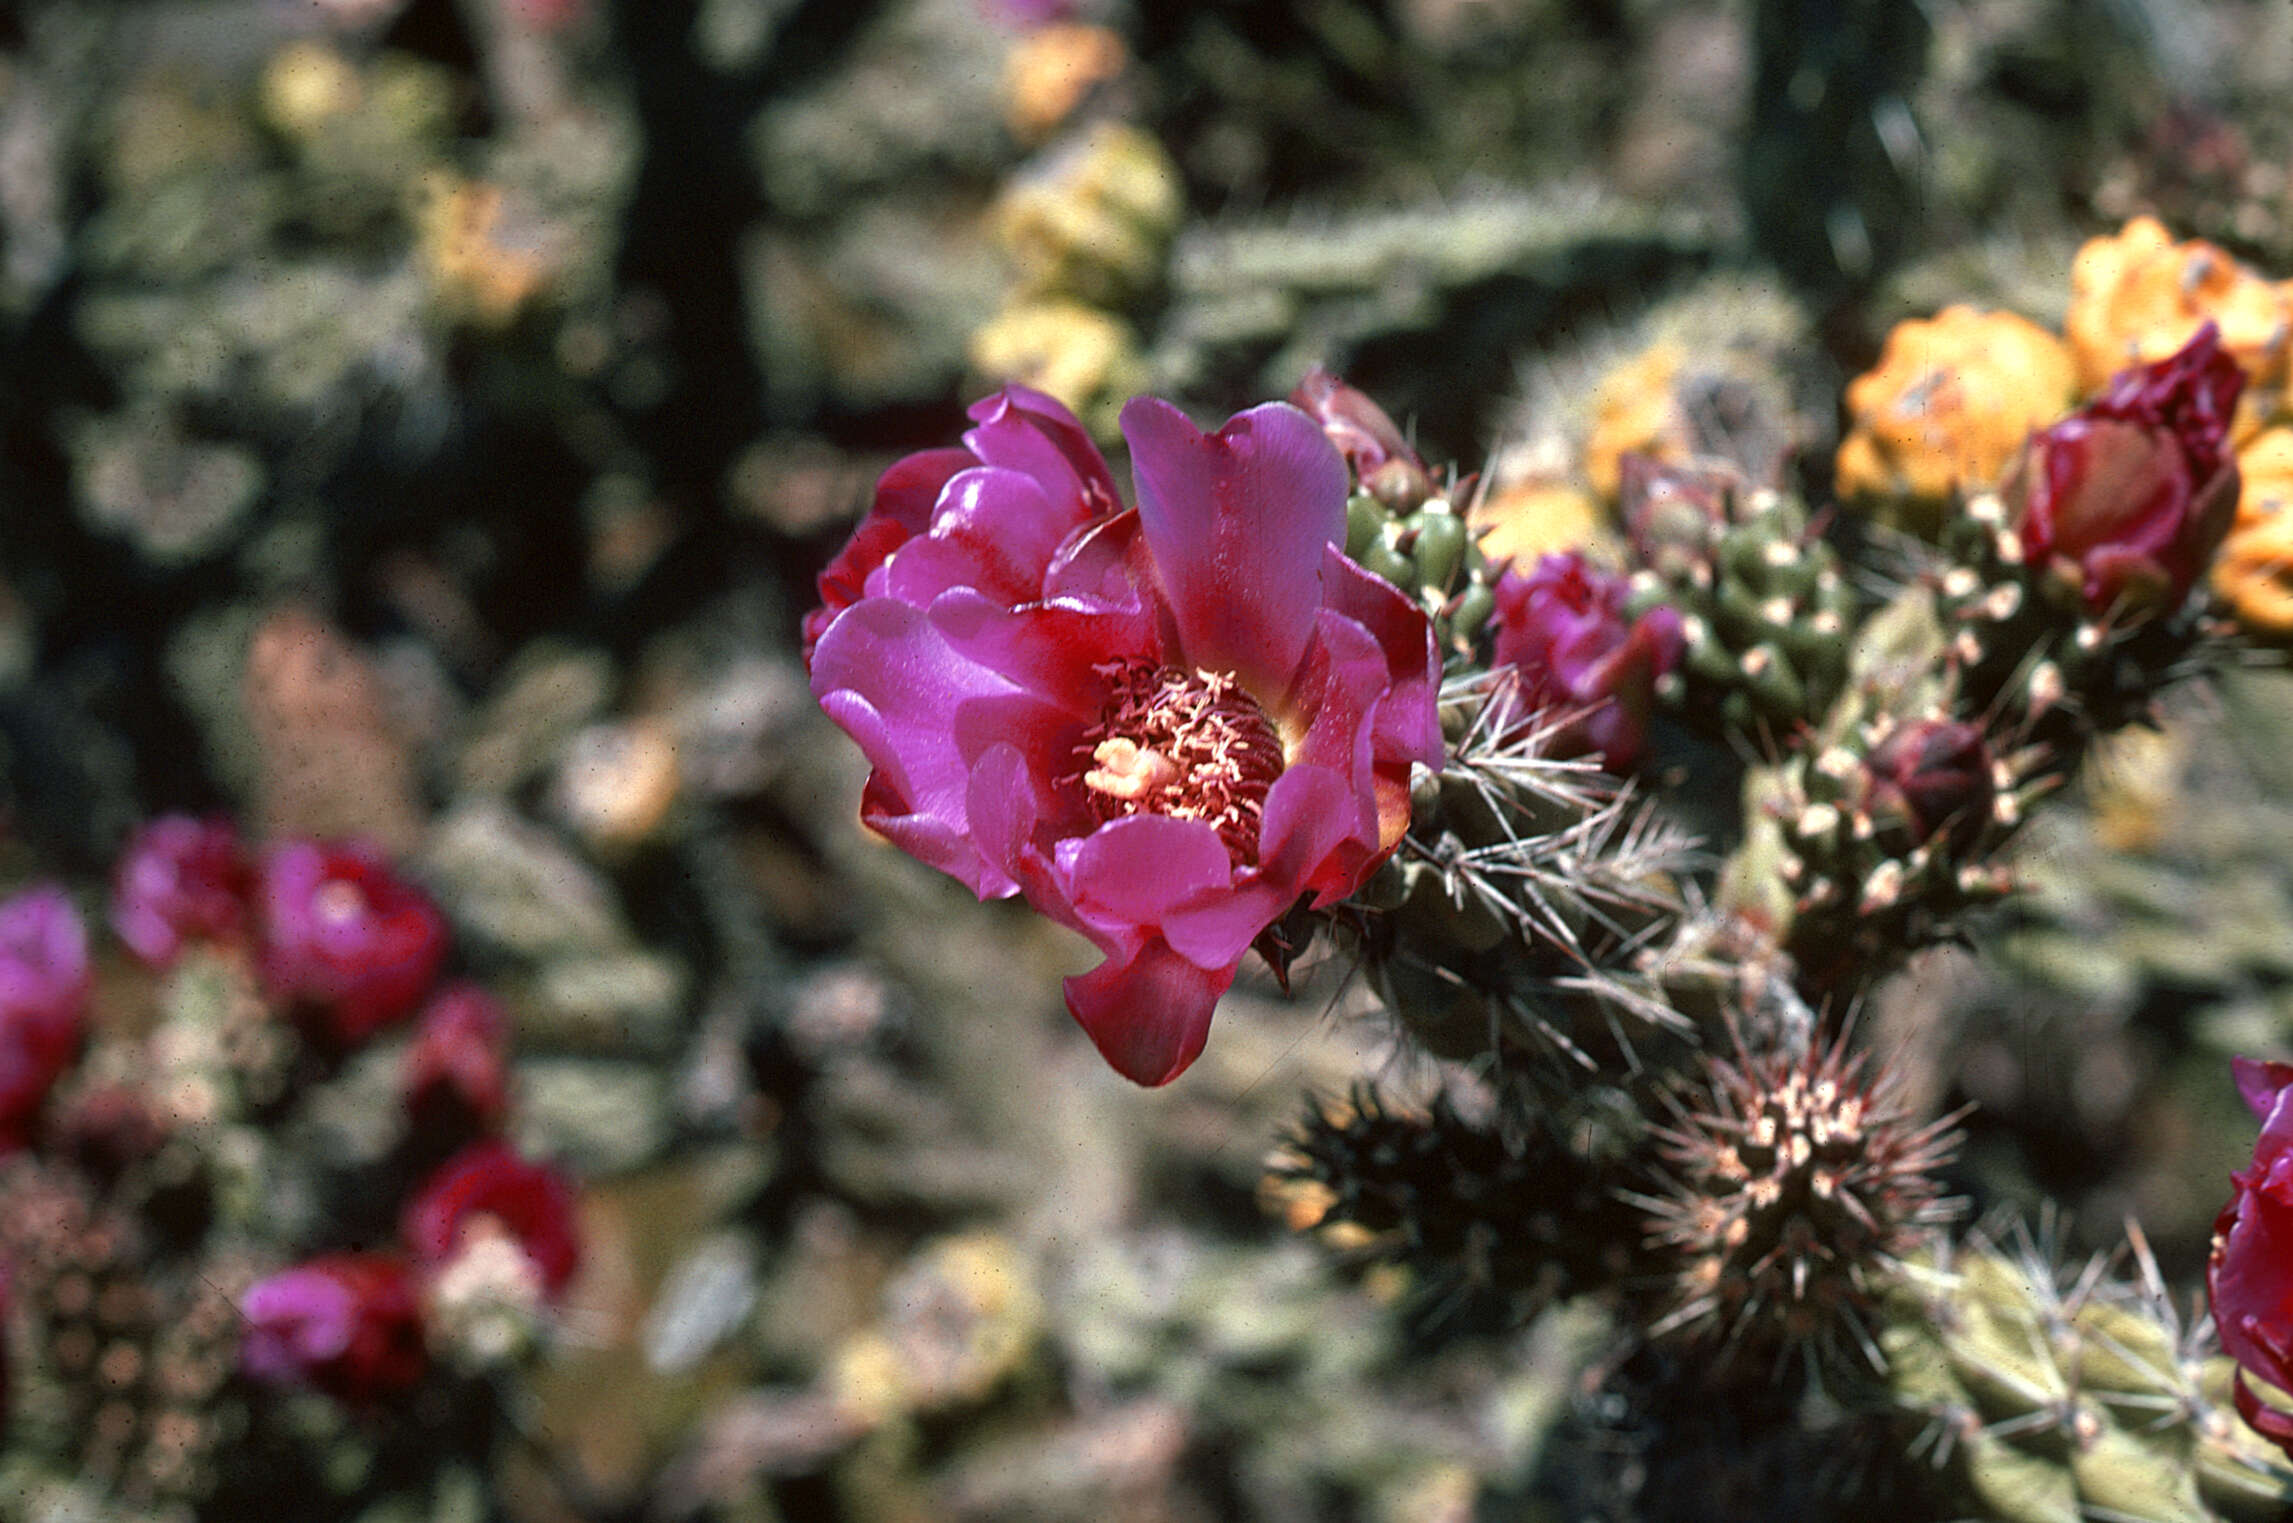 Image of Cane Prickly-pear Cactus